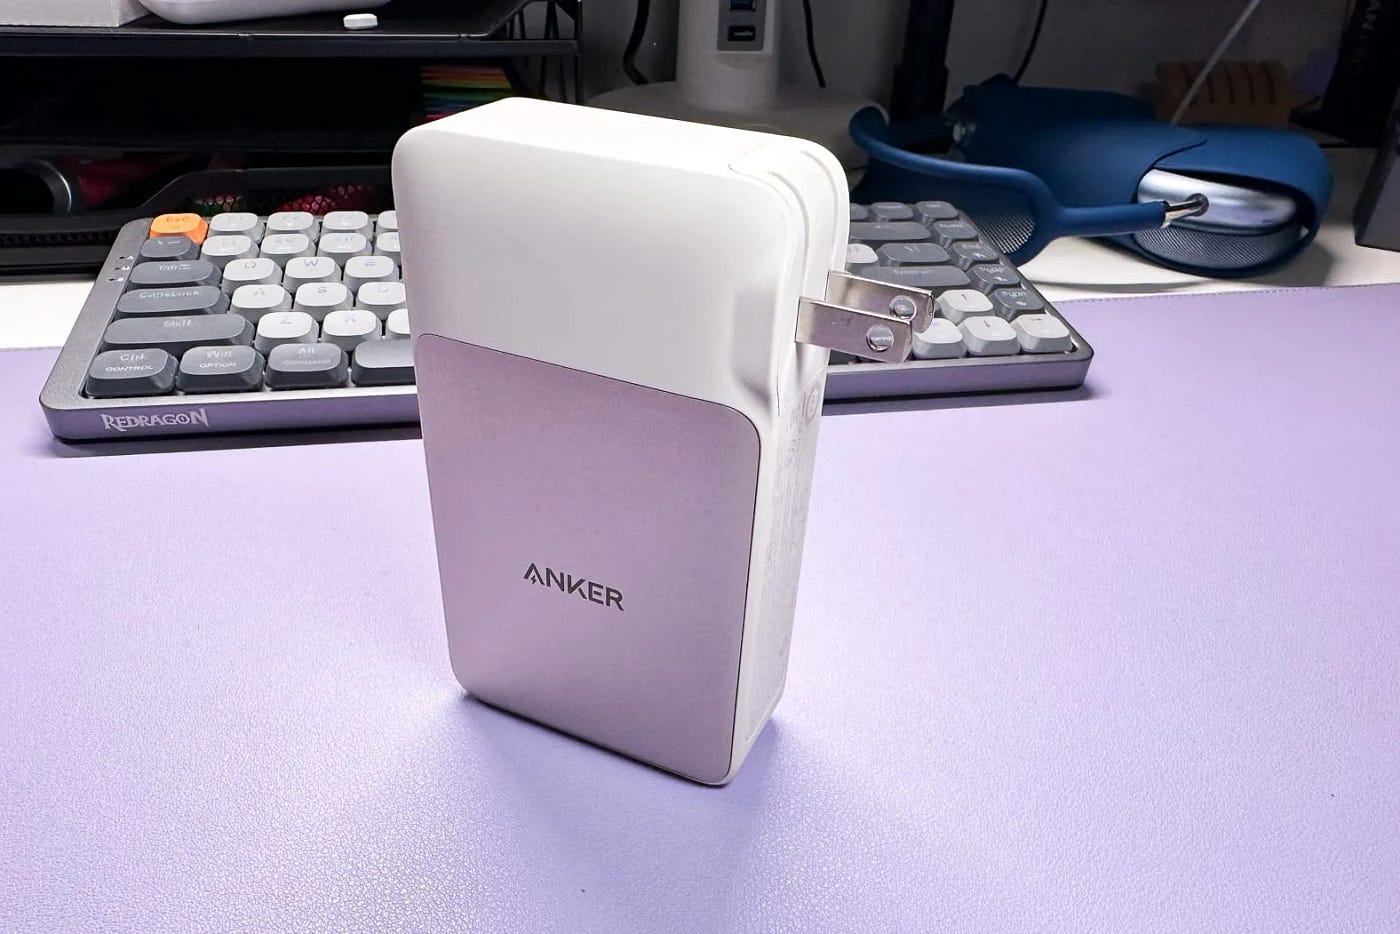 Anker 733 Power Bank: Power up 3 Devices on the Go!